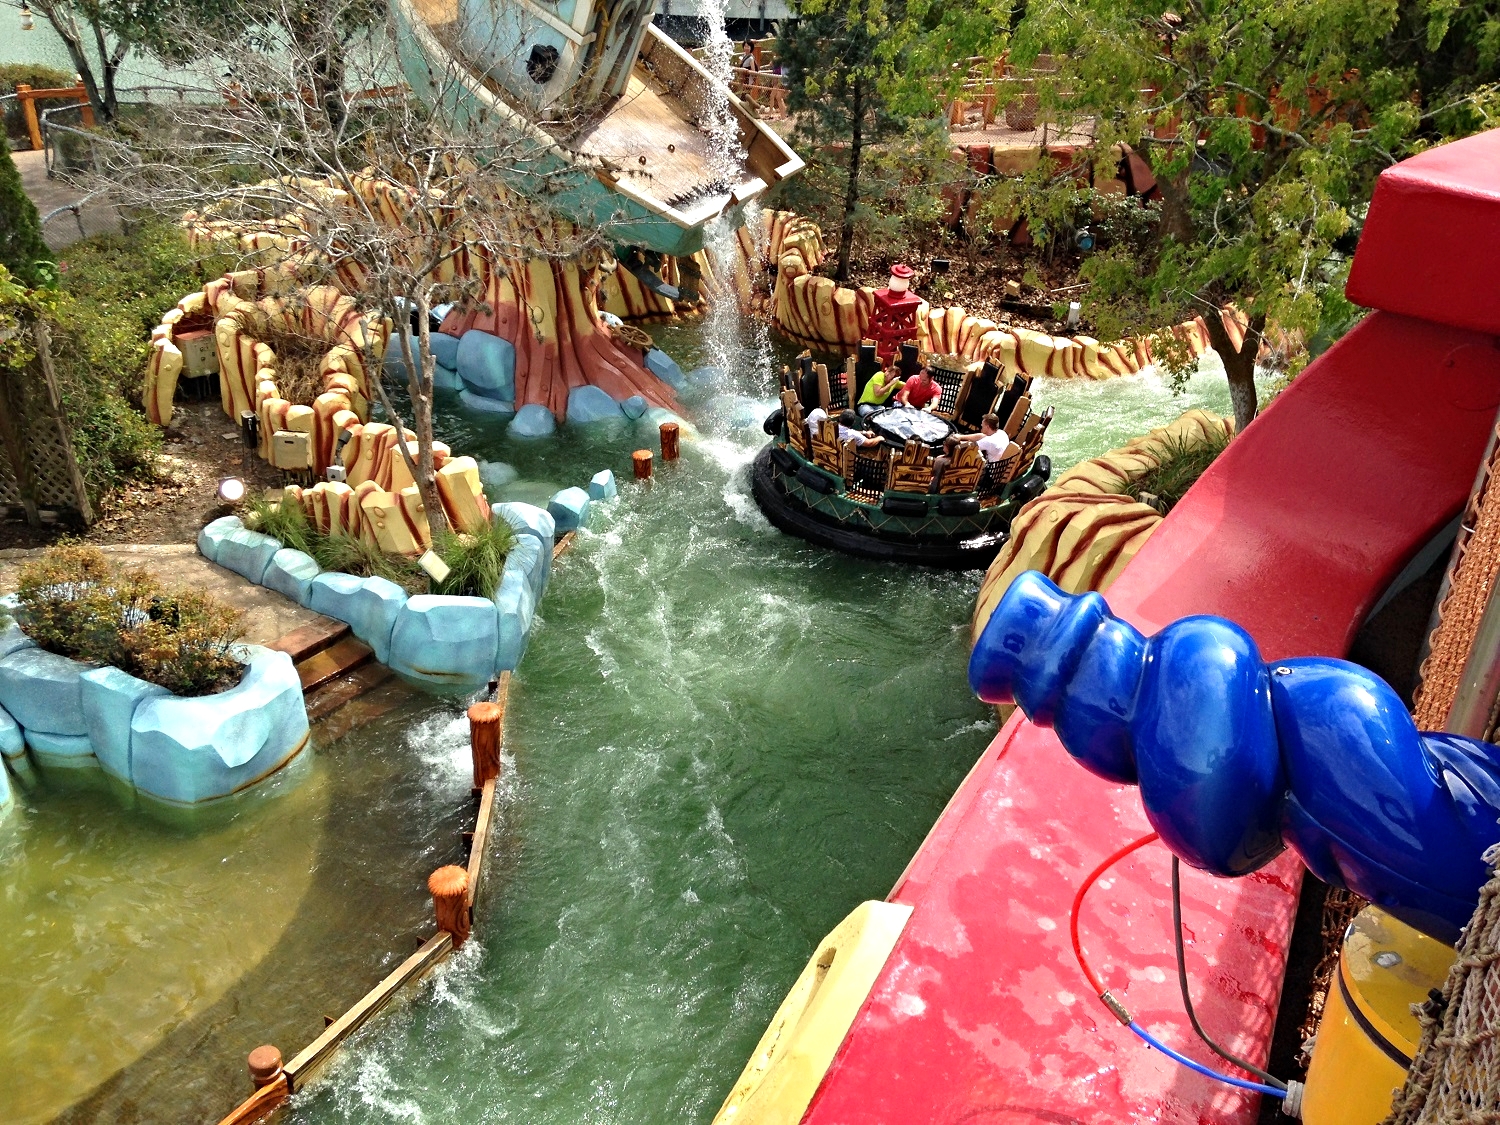 Themed attractions at Islands of Adventure – how do they live up to the  source material?